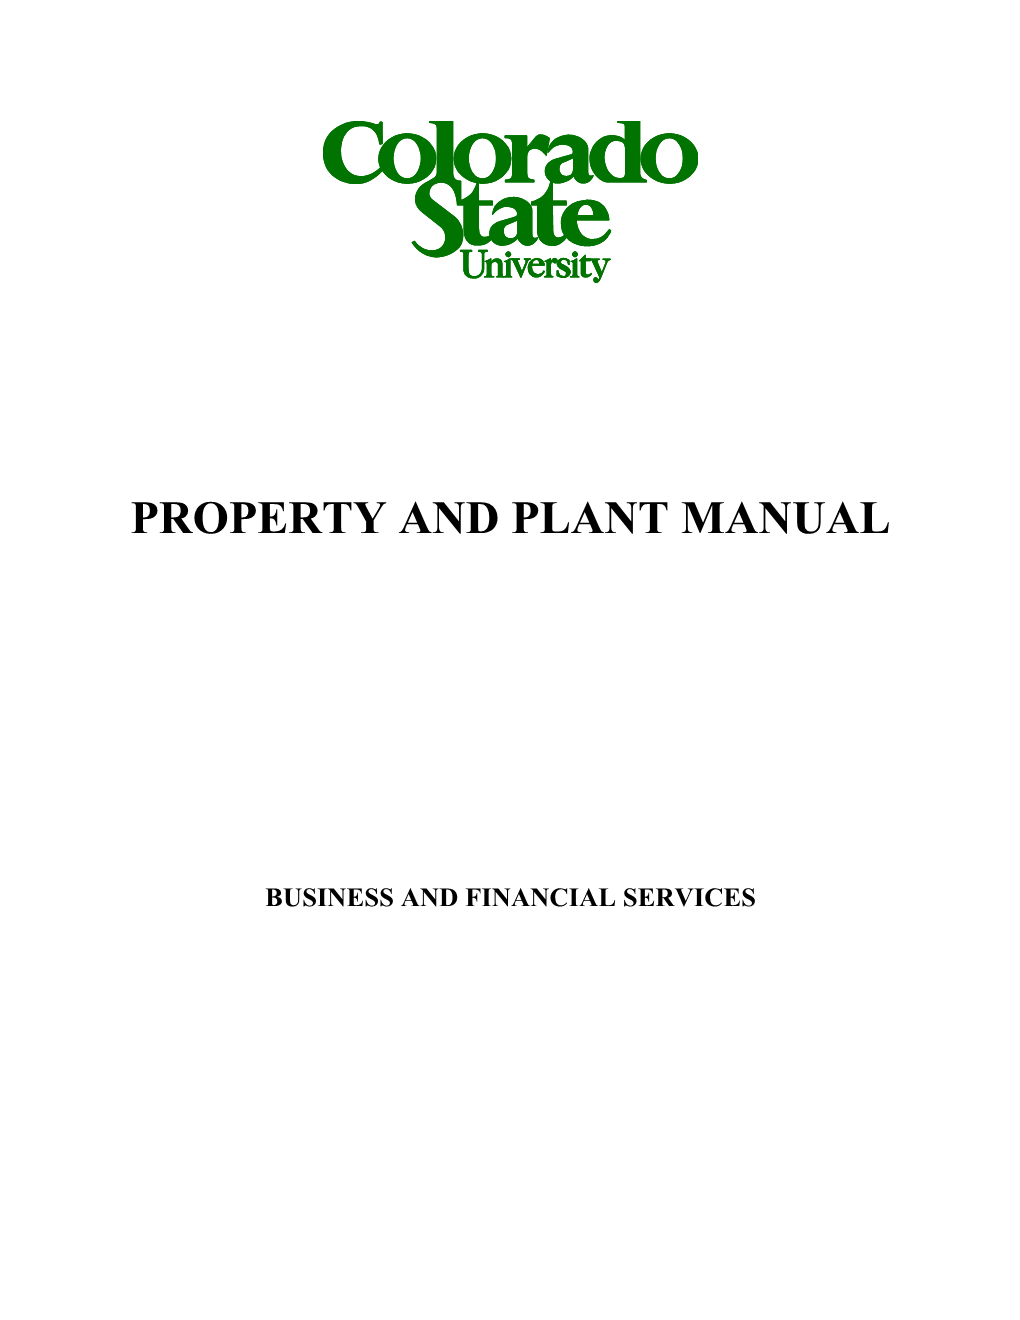 Property and Plant Manual